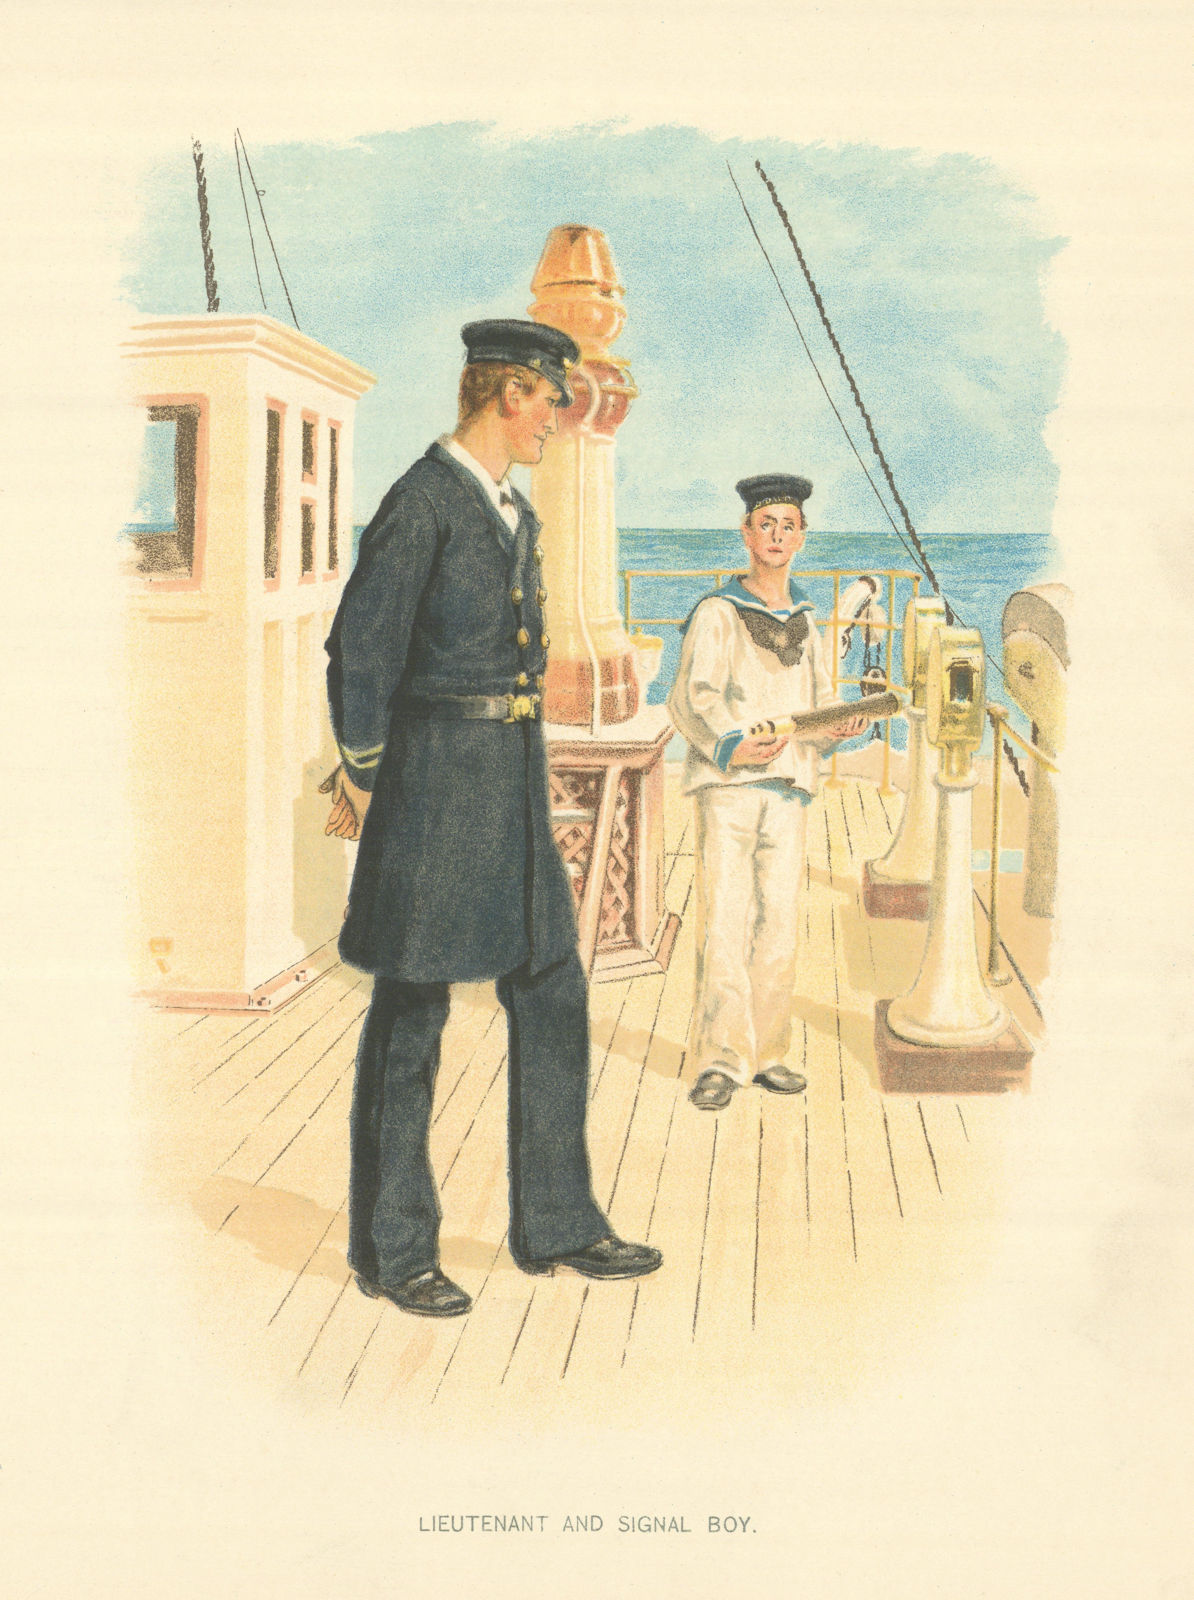 Lieutenant and Signal Boy by W.C. Symons. Royal Navy 1893 old antique print